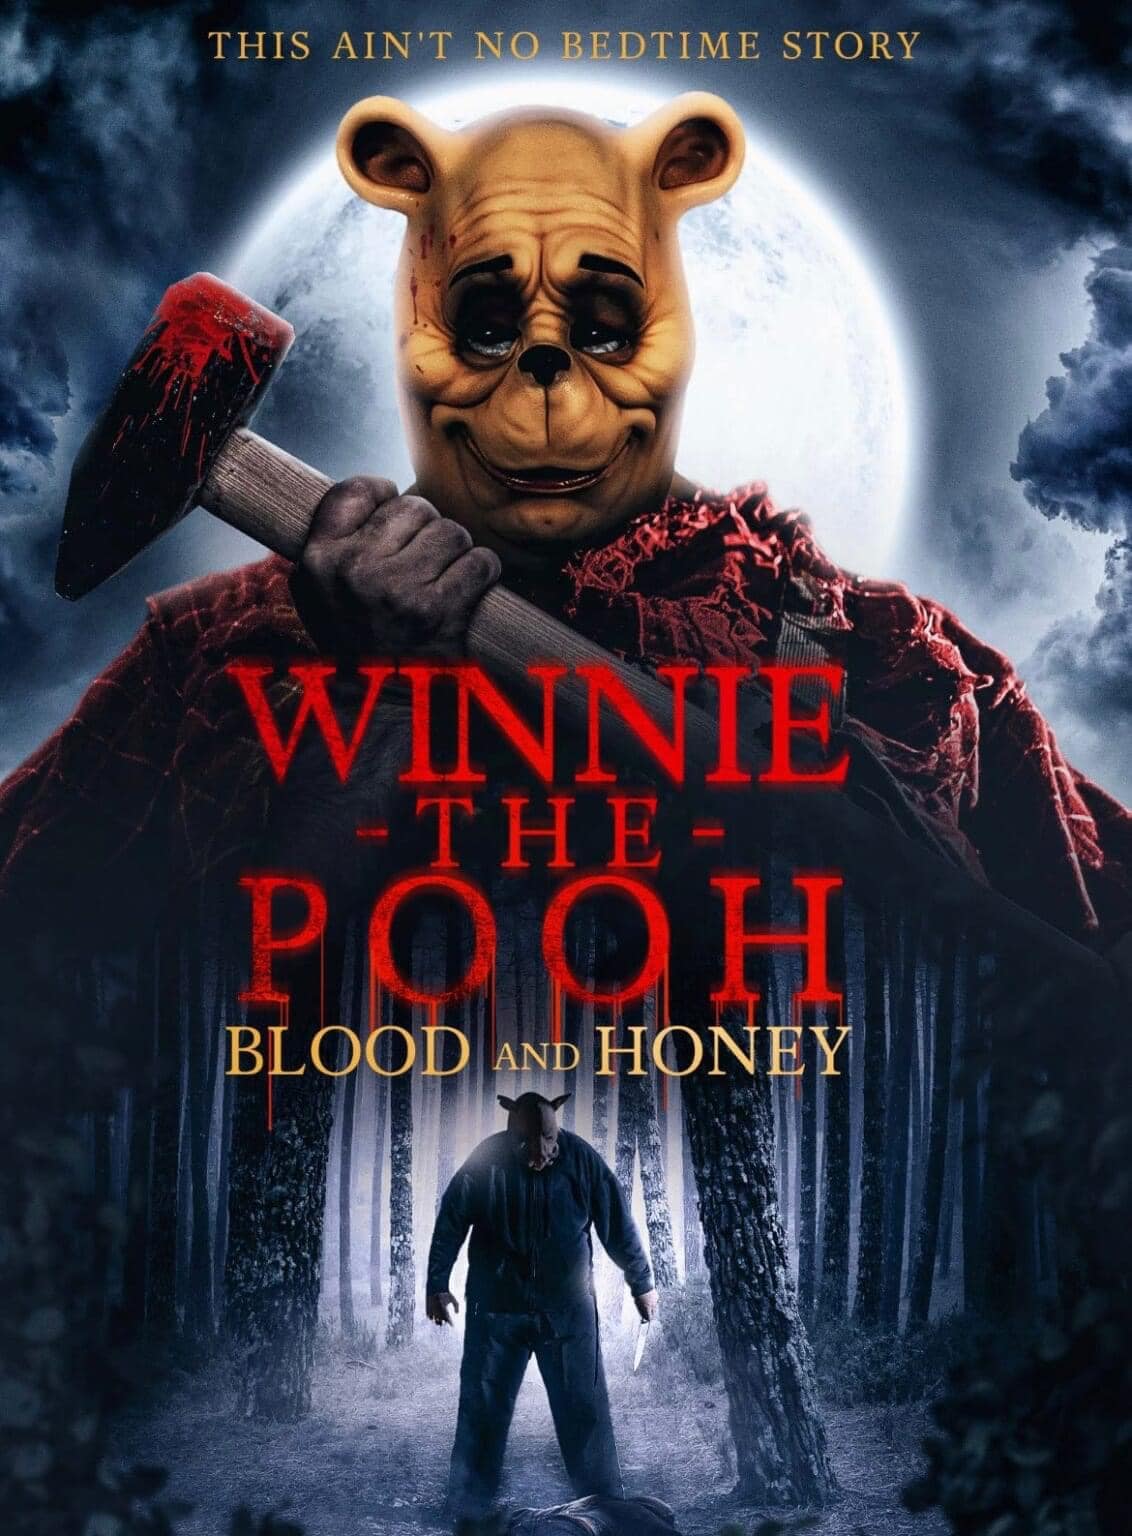 Winnie The Pooh Blood and Honey – Teaser Poster 2